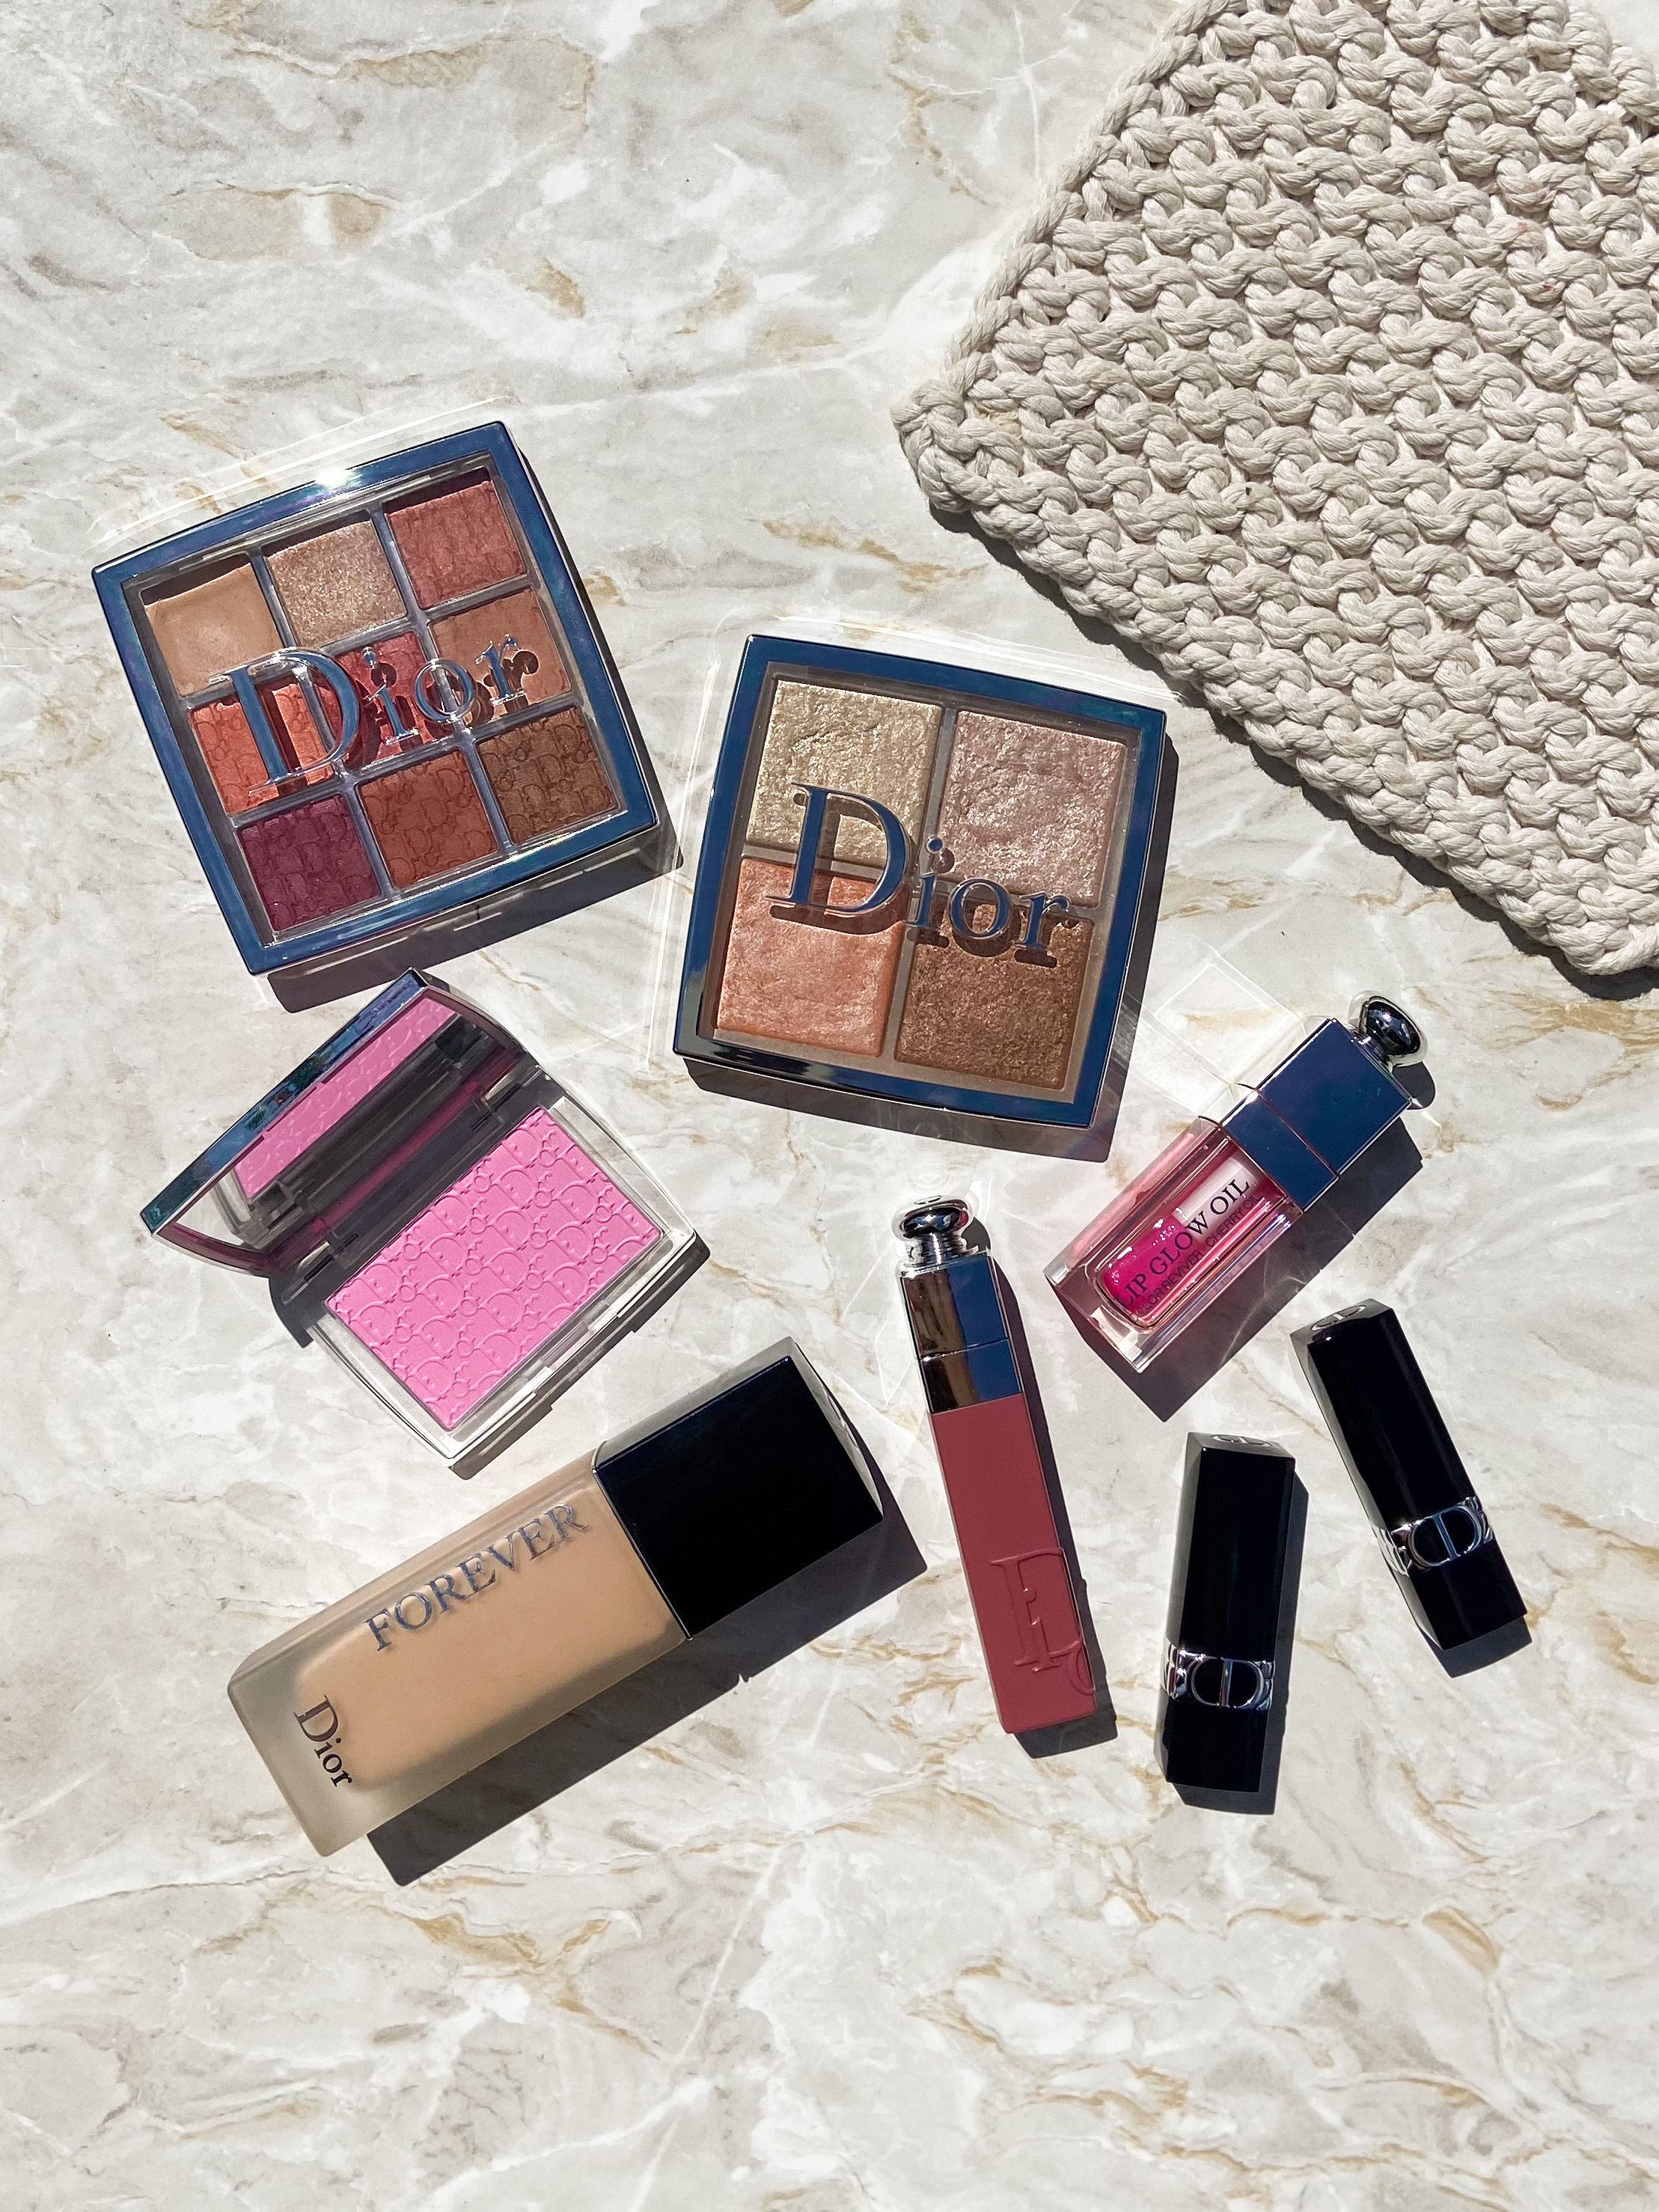 Dior Beauty Recommendations